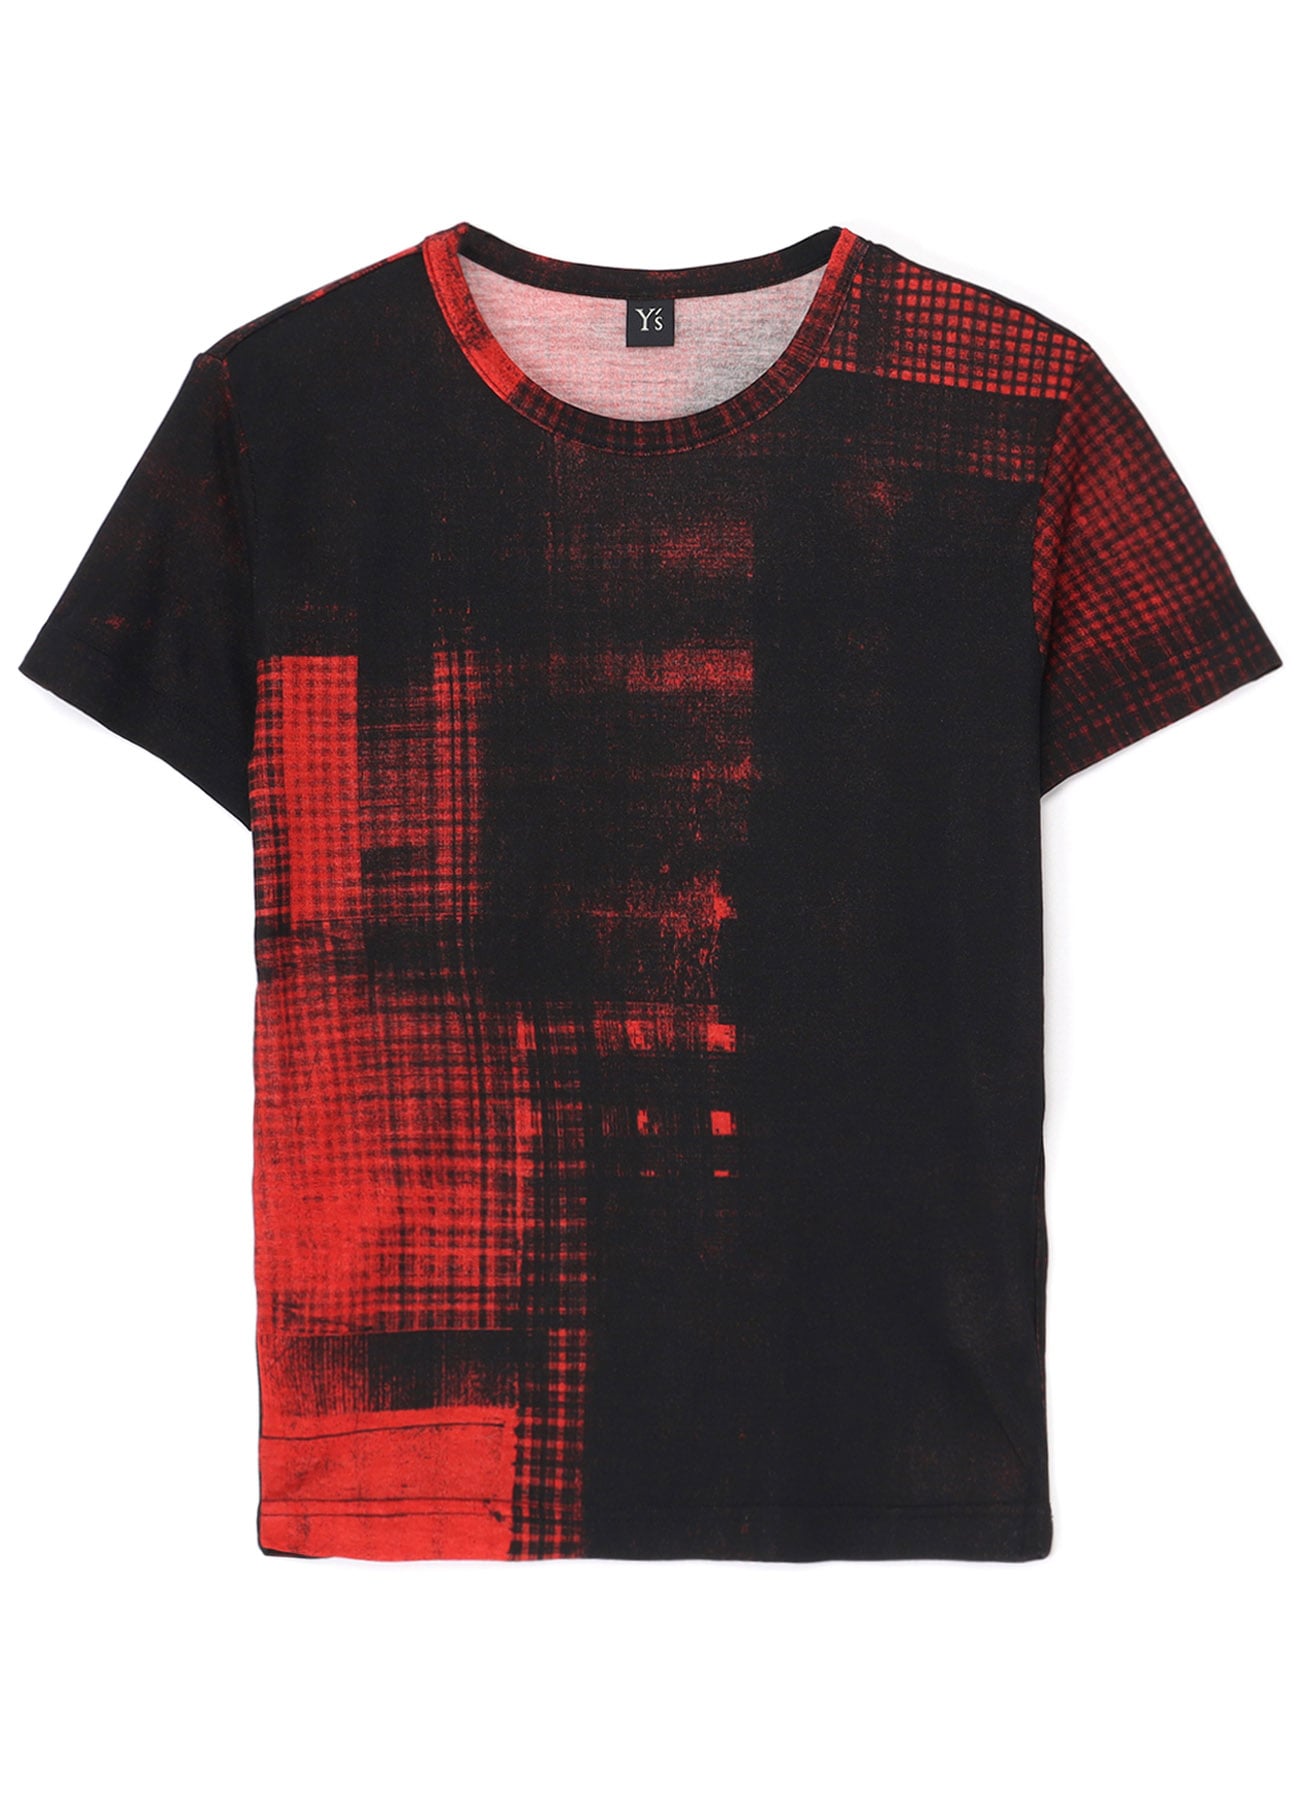 CHECKED PRINT ROUND NECK HALF SLEEVE T-SHIRT(S Red): Y's｜THE SHOP 